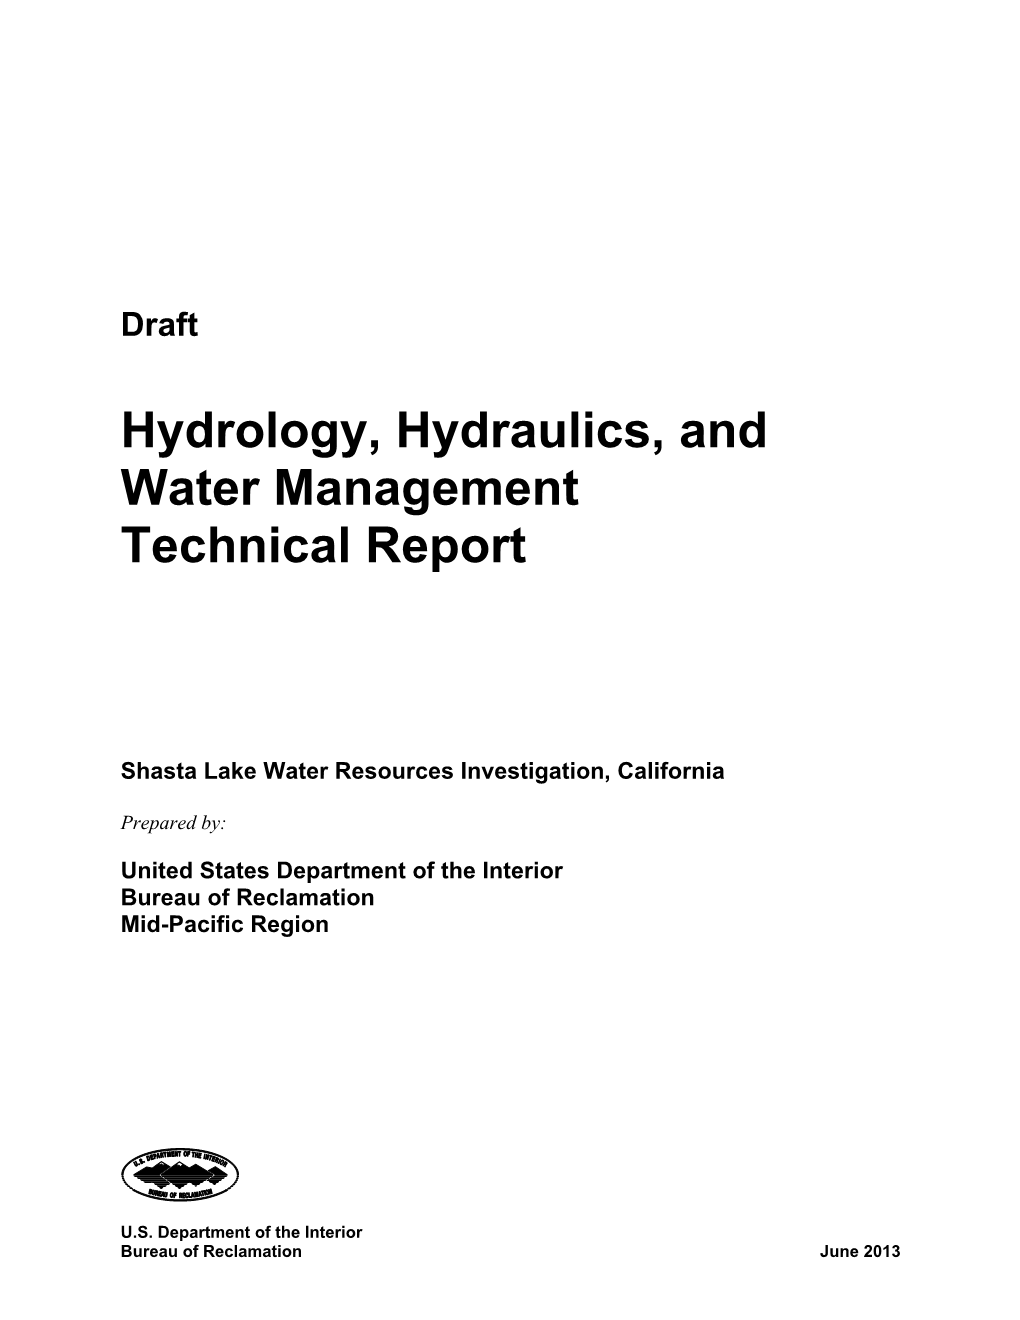 Hydrology, Hydraulics, and Water Management Technical Report